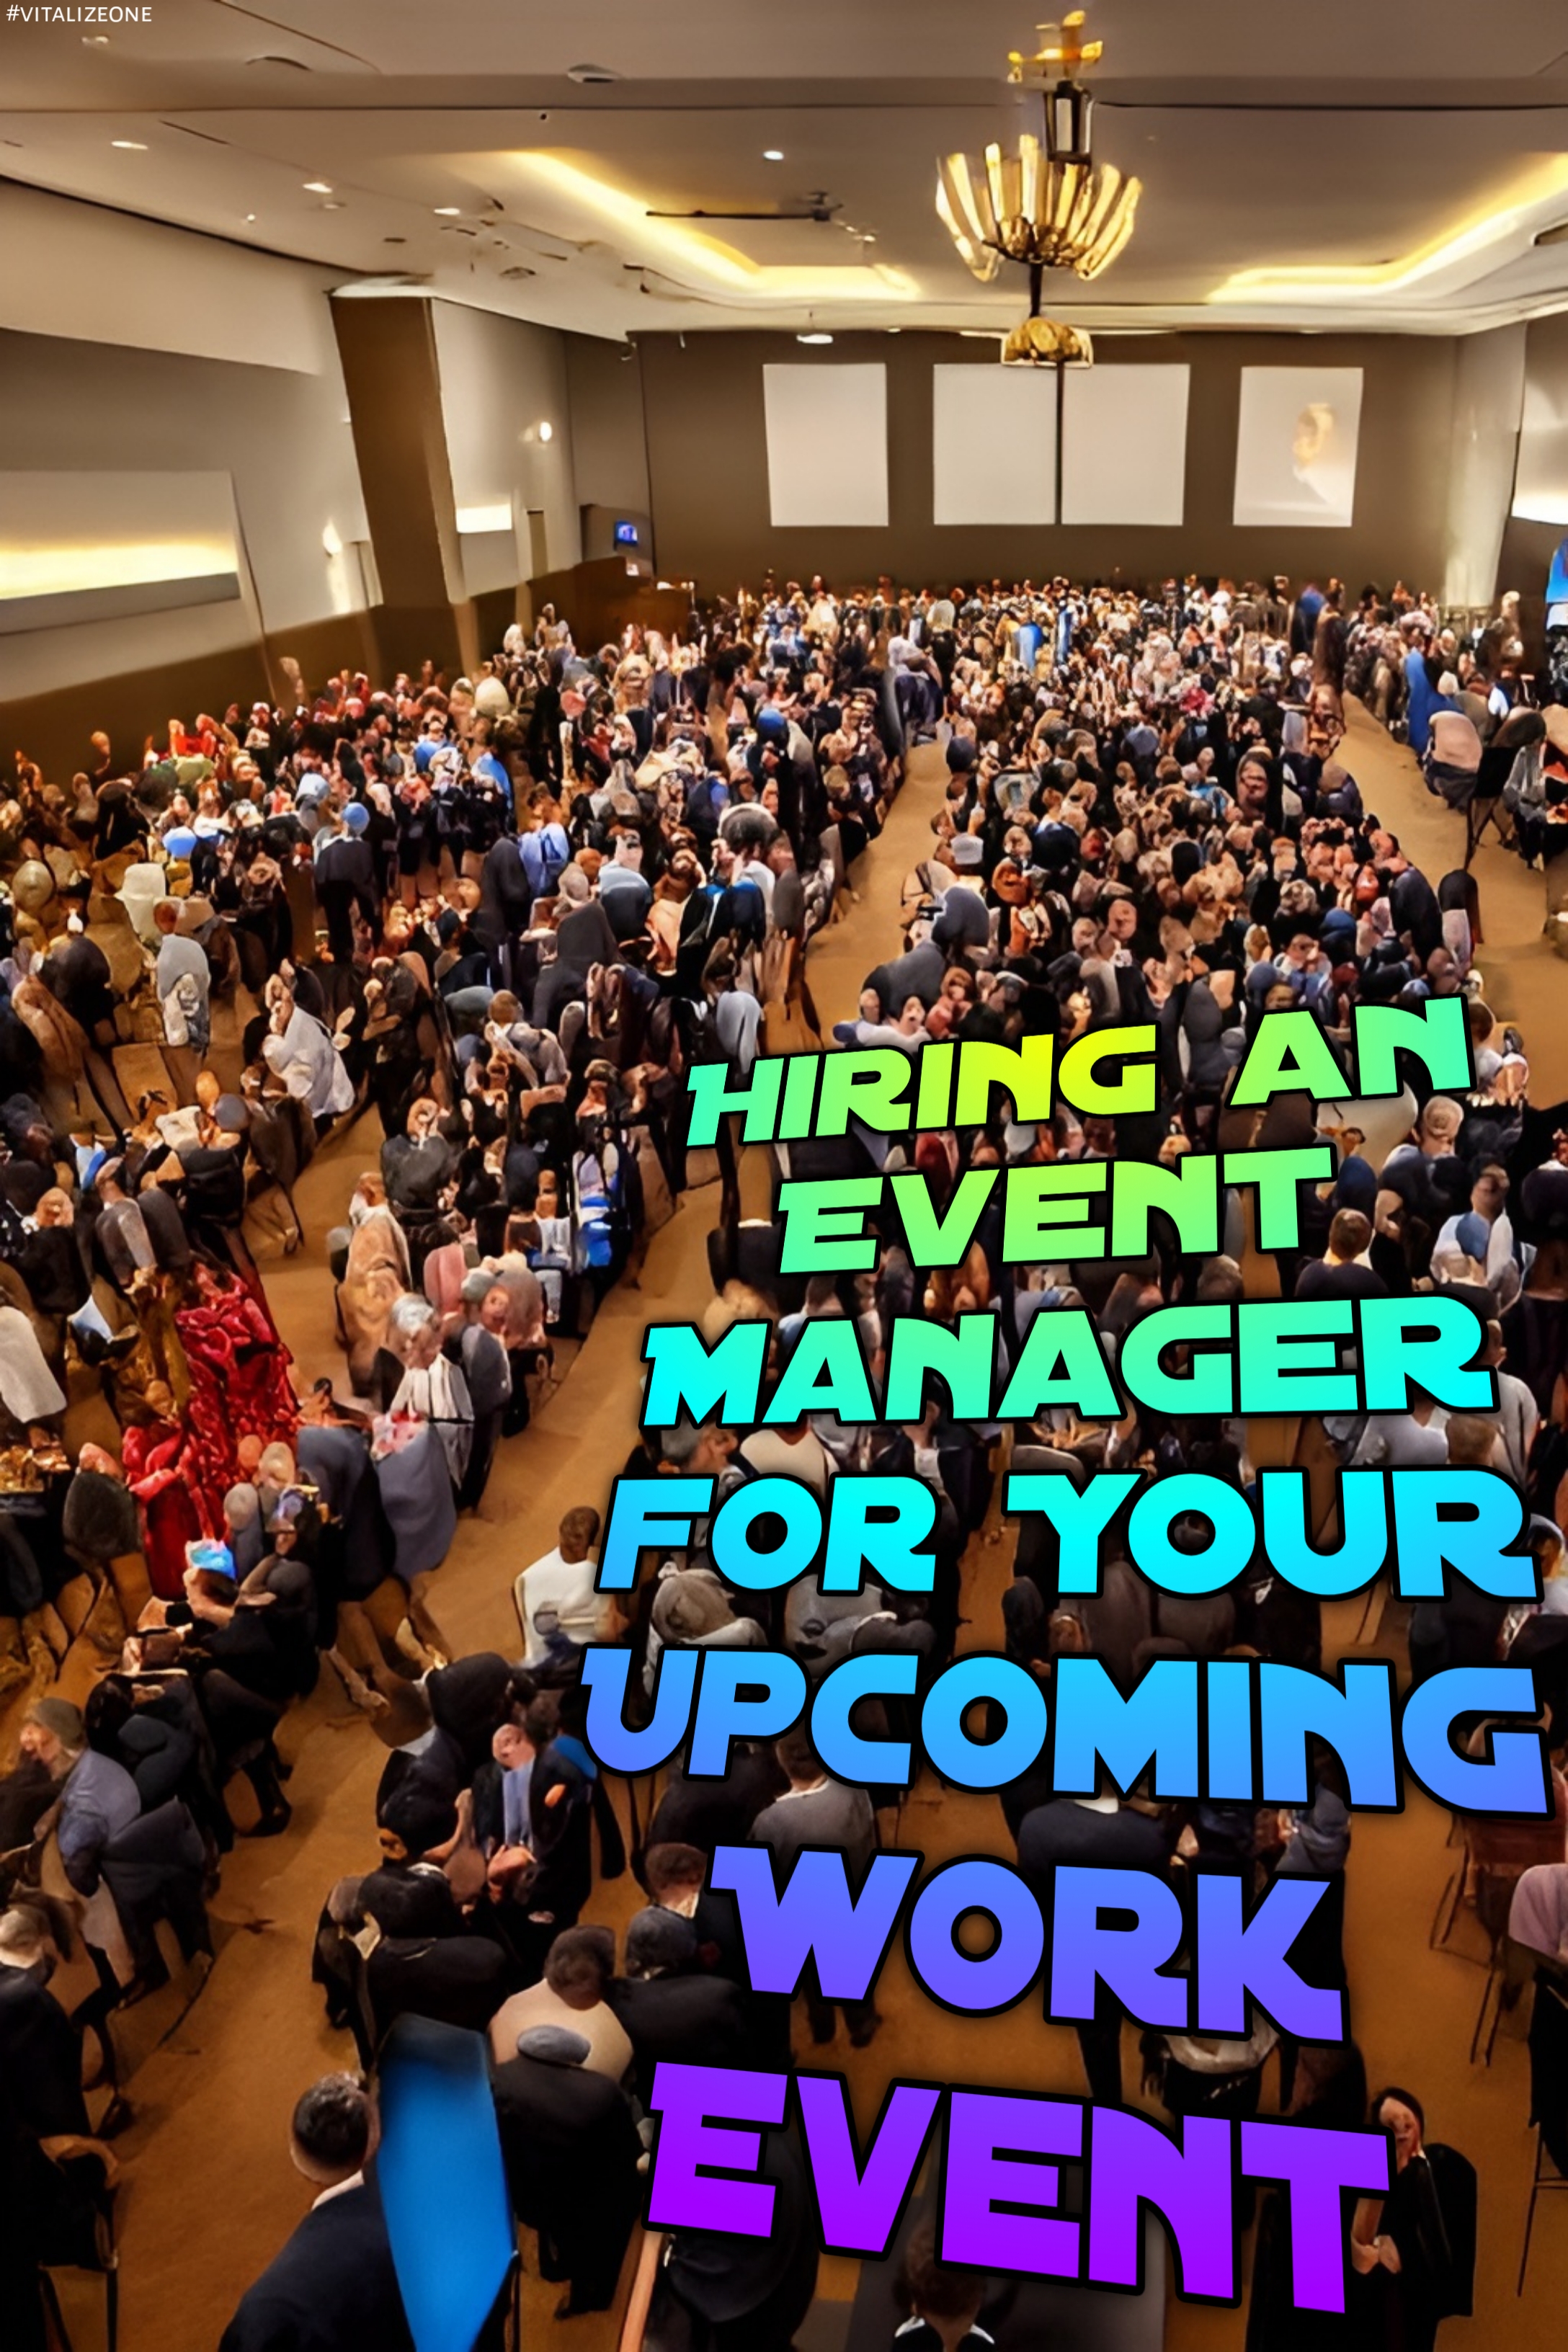 Why You Should Hire an Event Manager for Your Upcoming Work Event | VitalyTennant.com | #vitalizeone 2